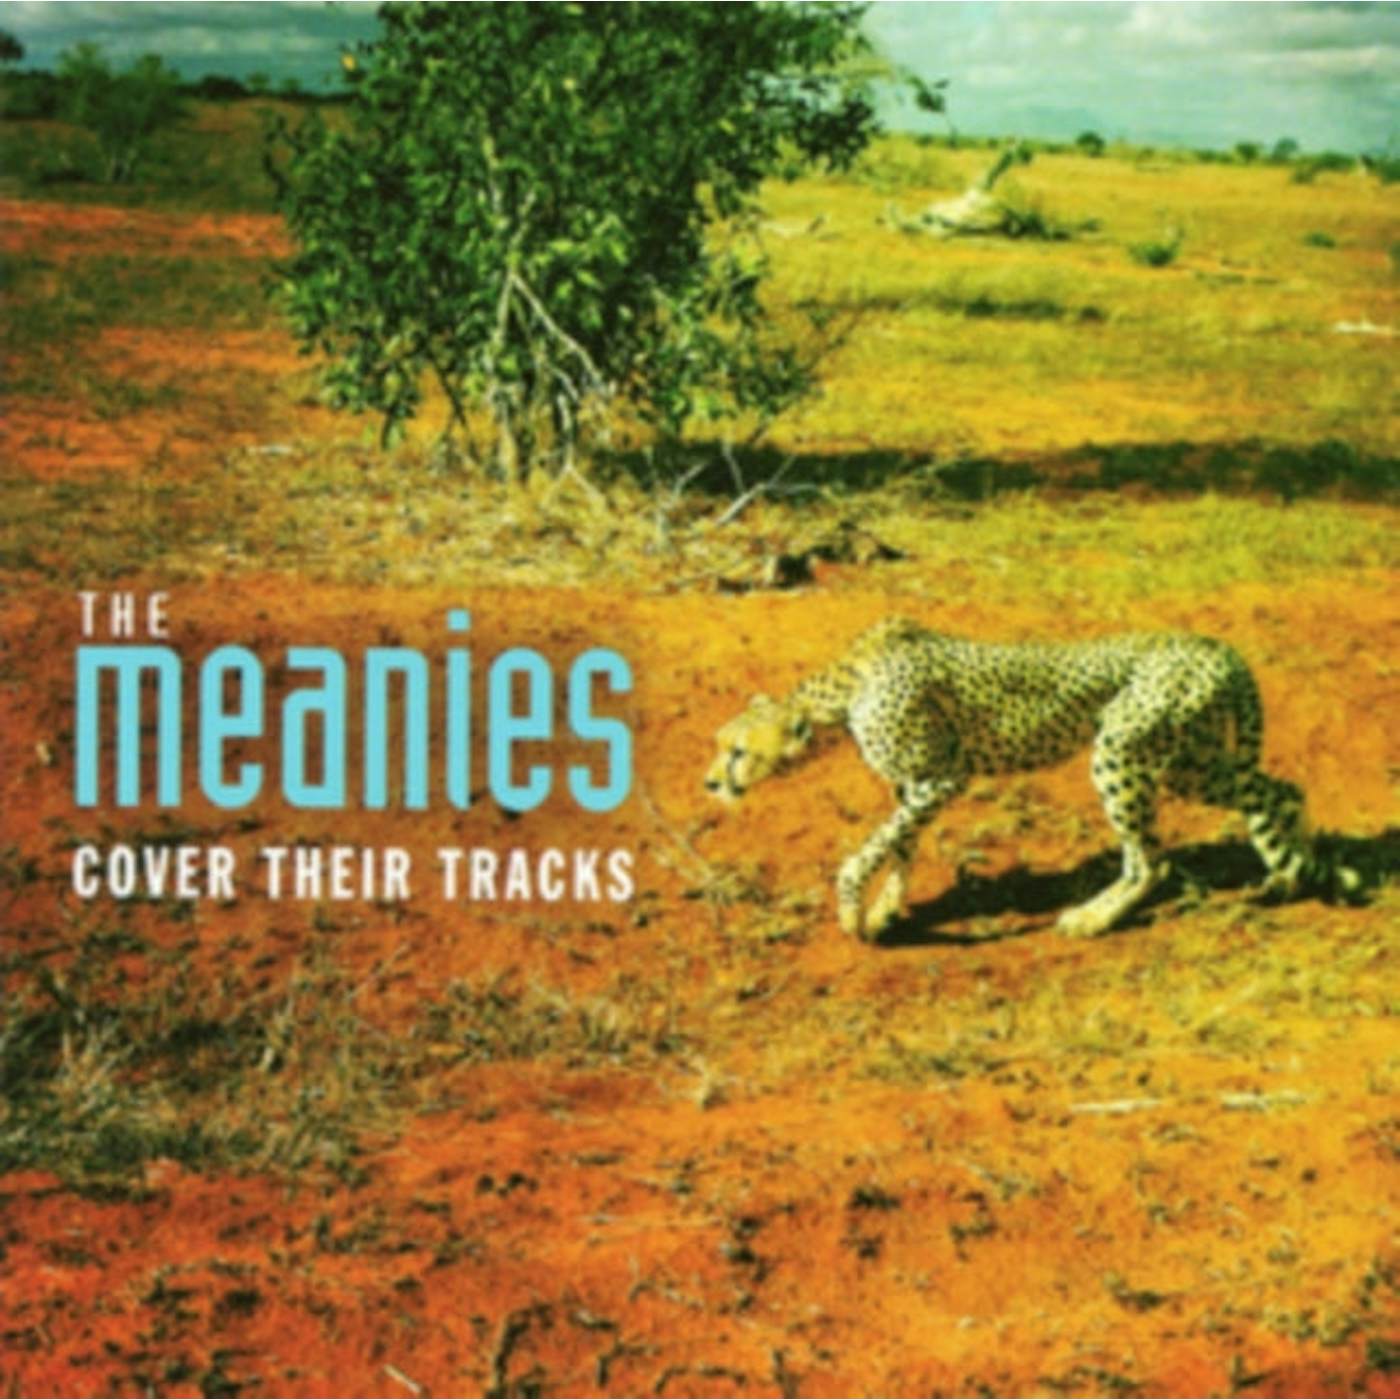 The Meanies CD - Cover Their Tracks